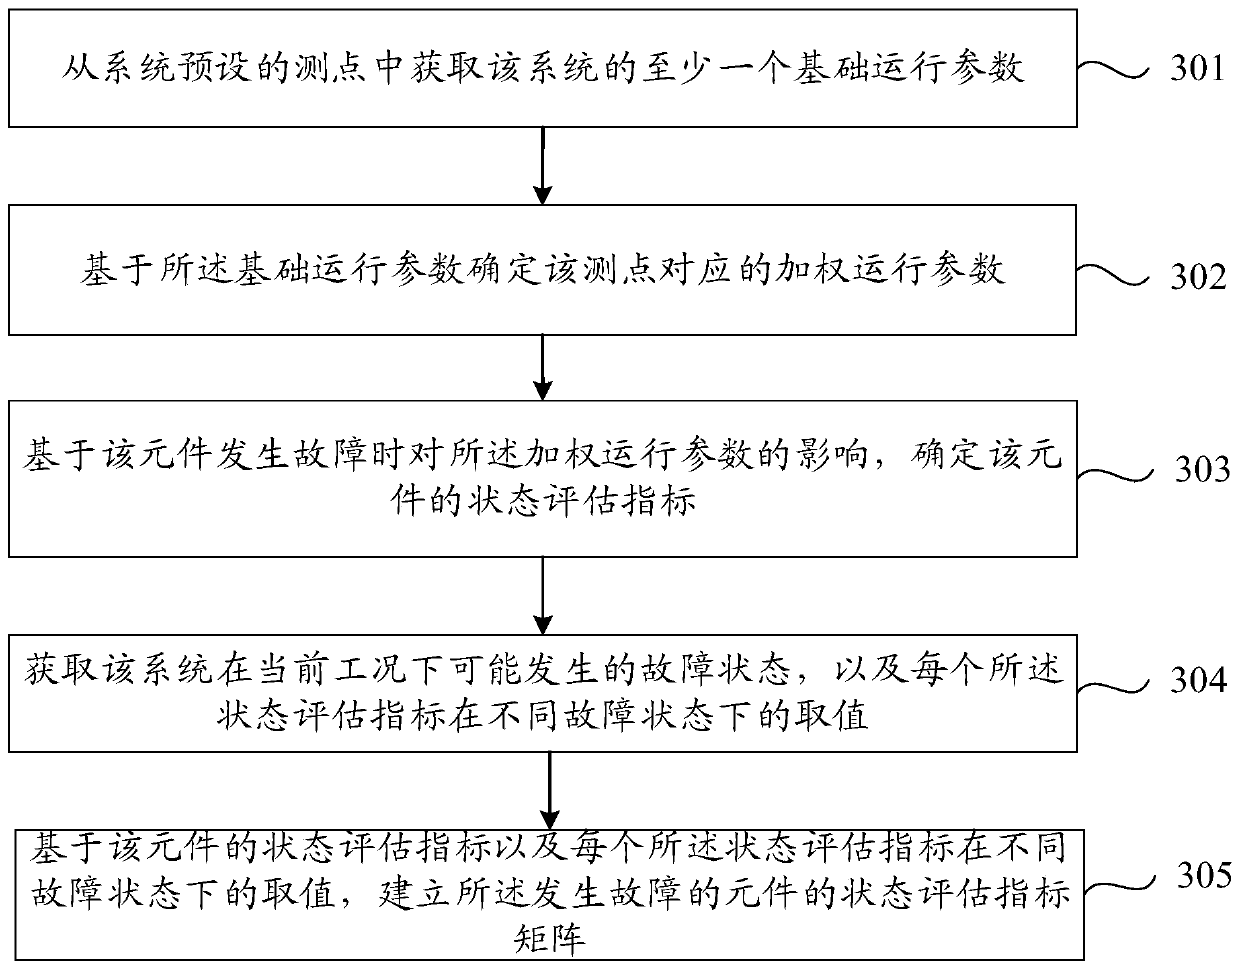 Nuclear power conventional island water supply system reliability evaluation method and device